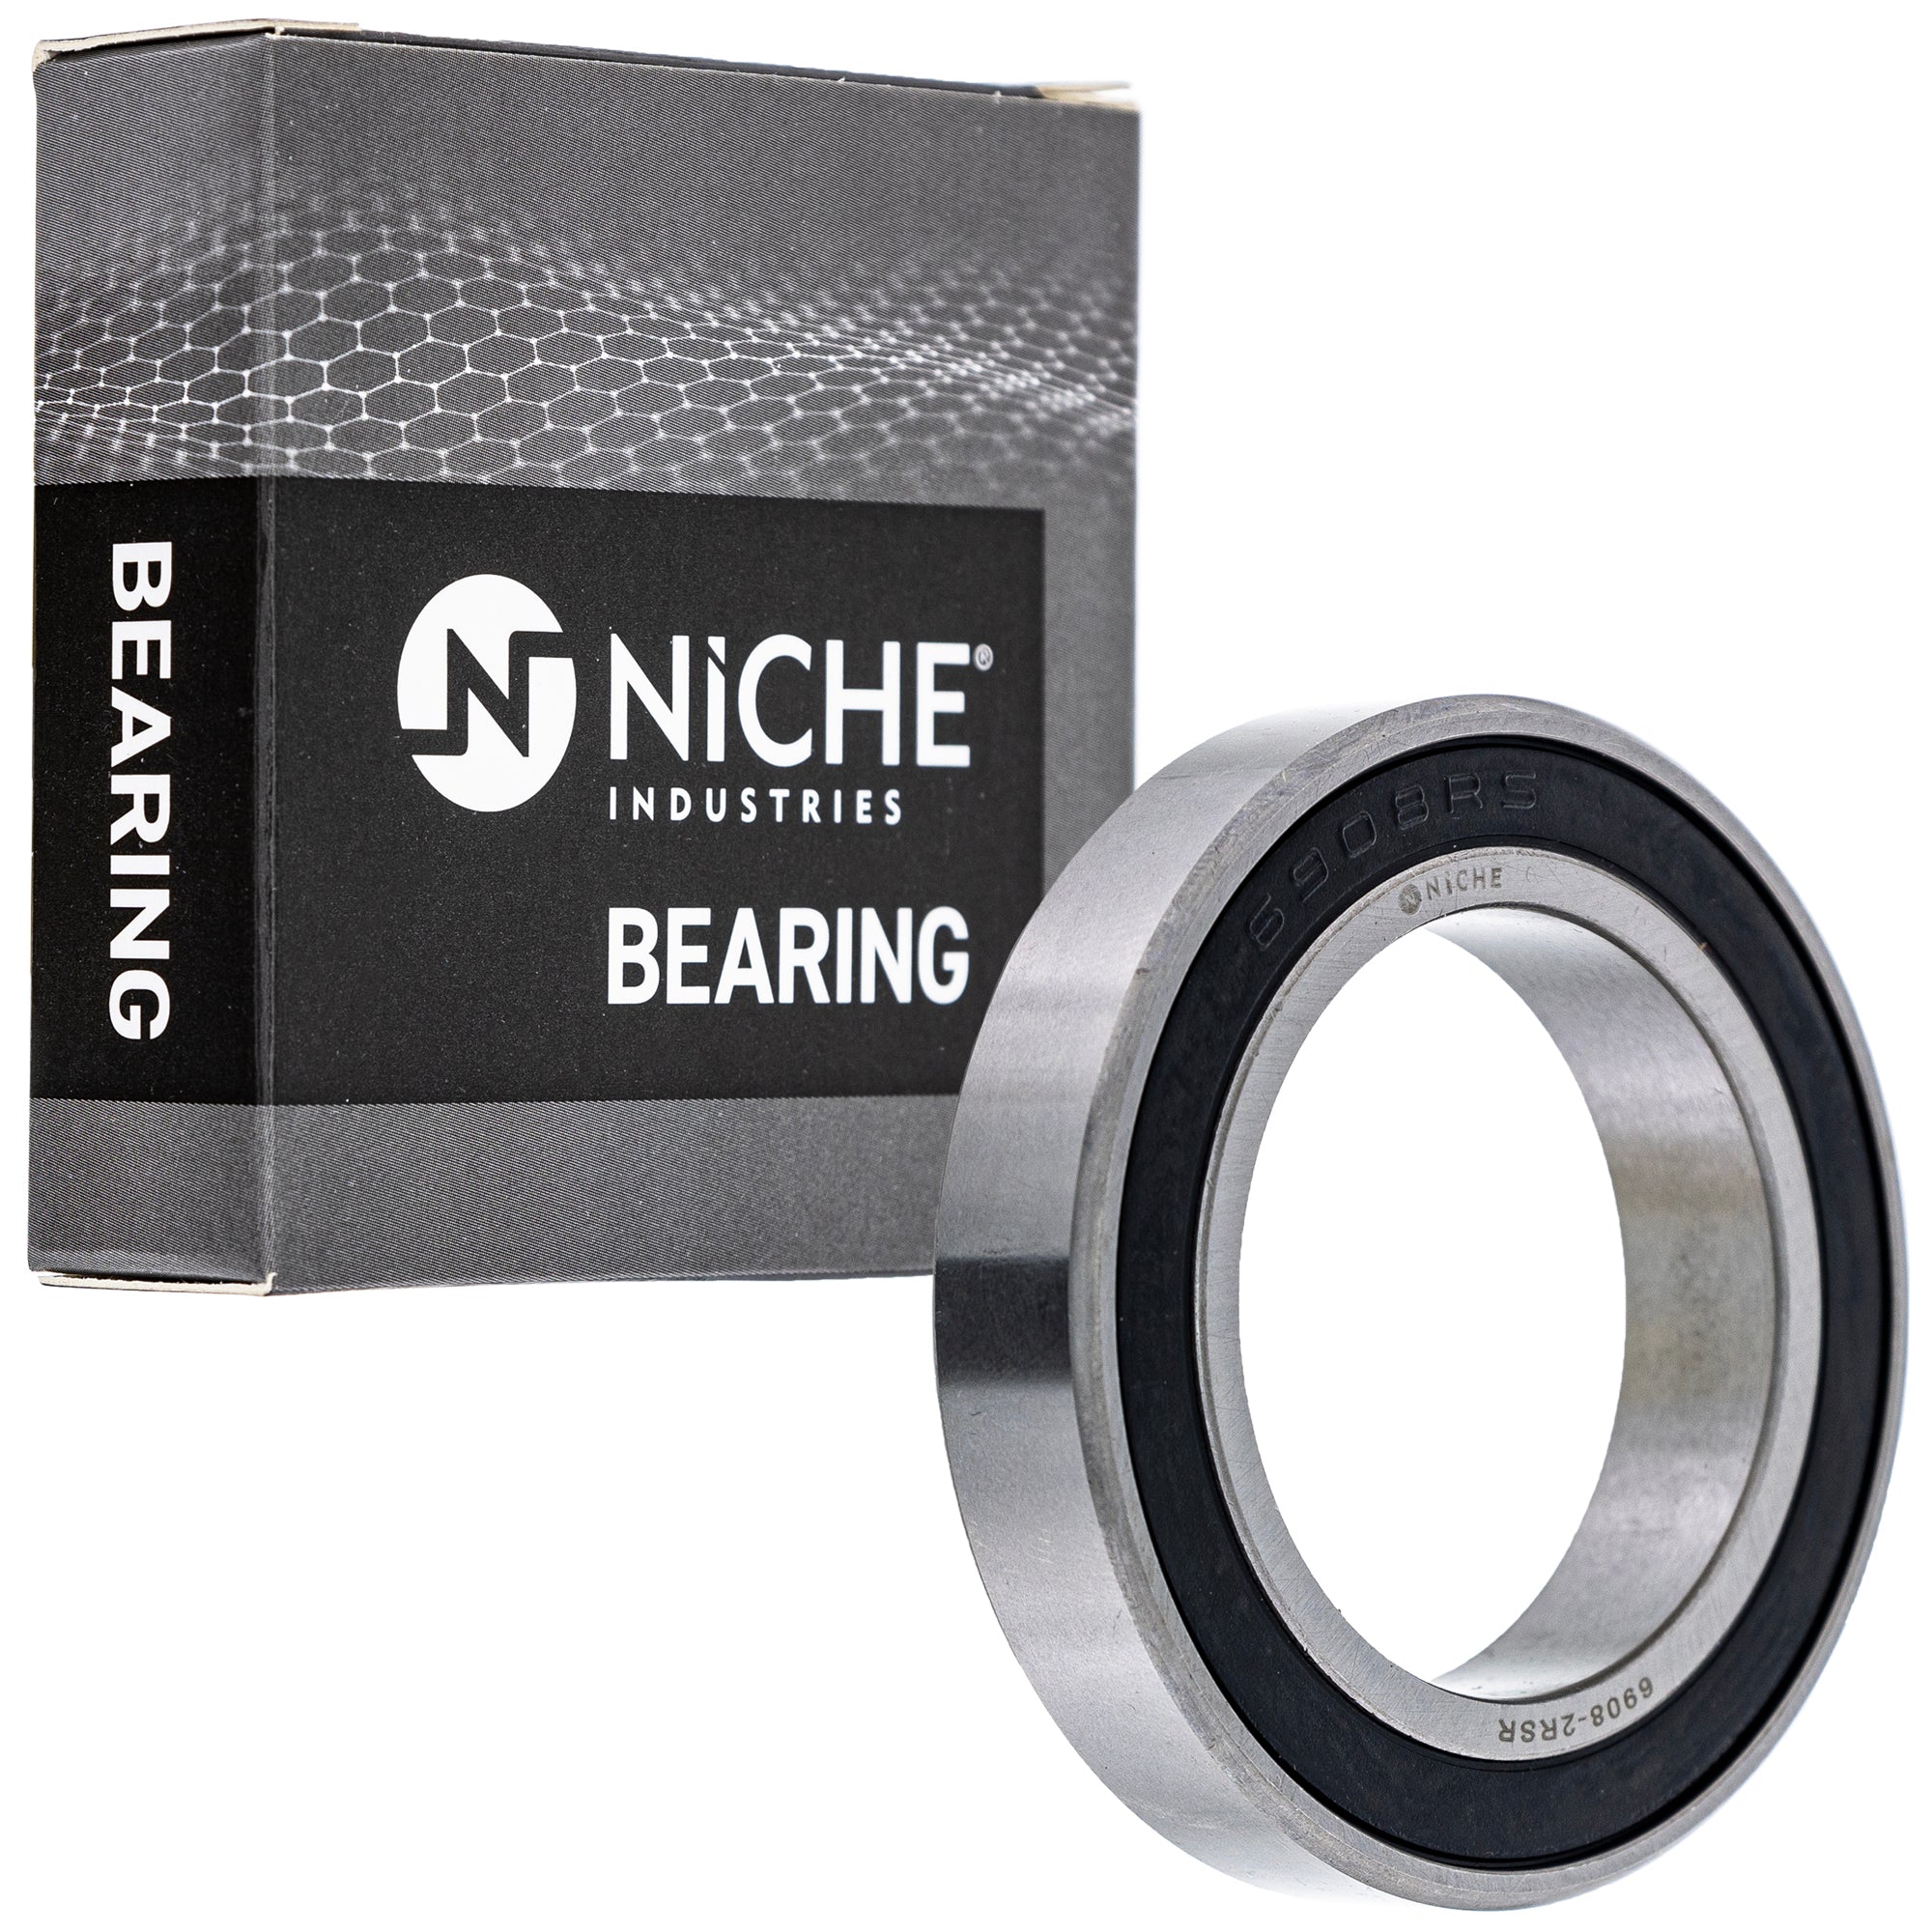 NICHE 519-CBB2330R Bearing 2-Pack for zOTHER BRP Can-Am Ski-Doo